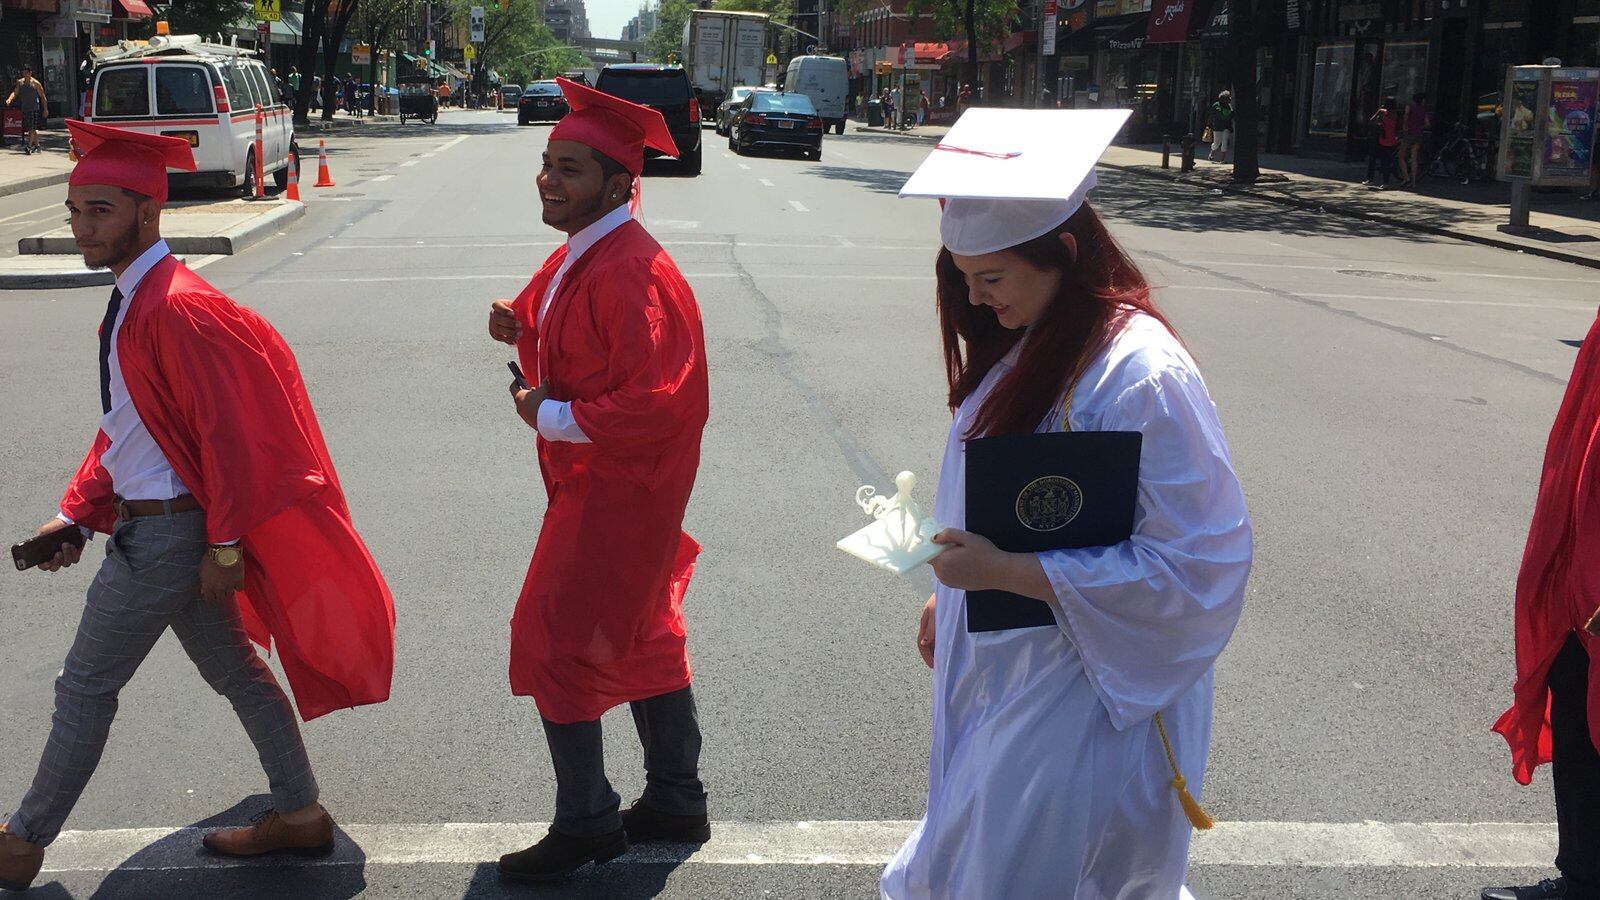 Students from The Urban Assembly Gateway School for Technology walked to a graduation ceremony.